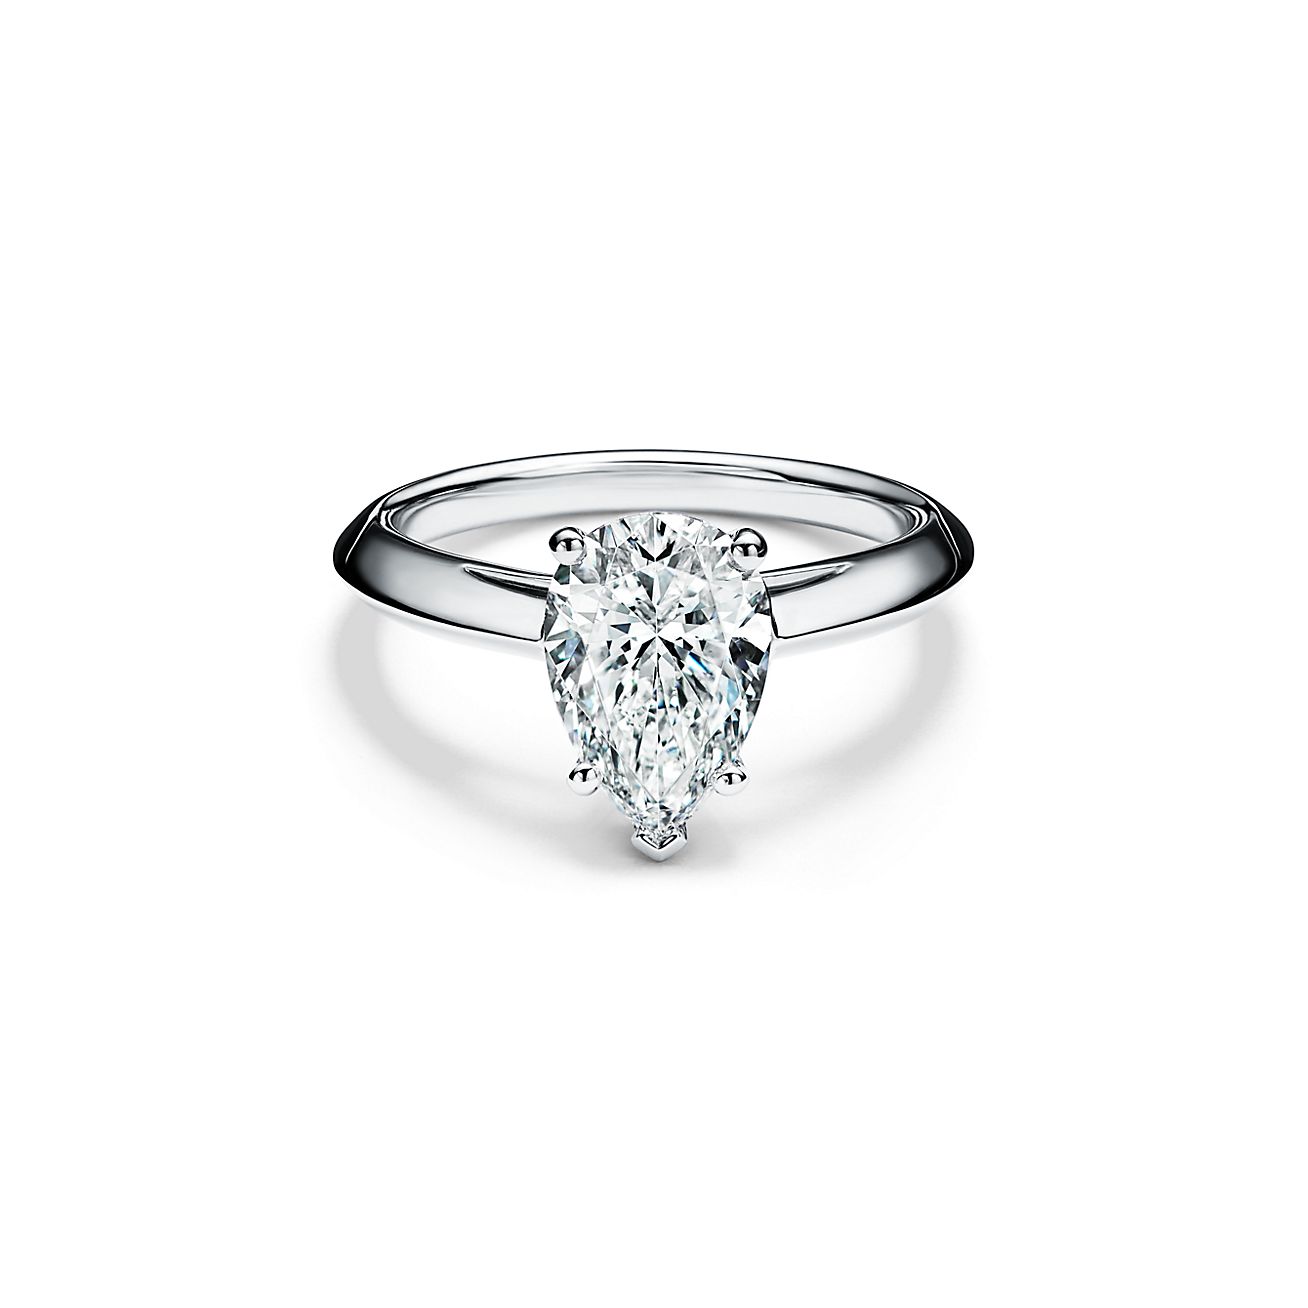 Pear-shaped diamond engagement ring in 